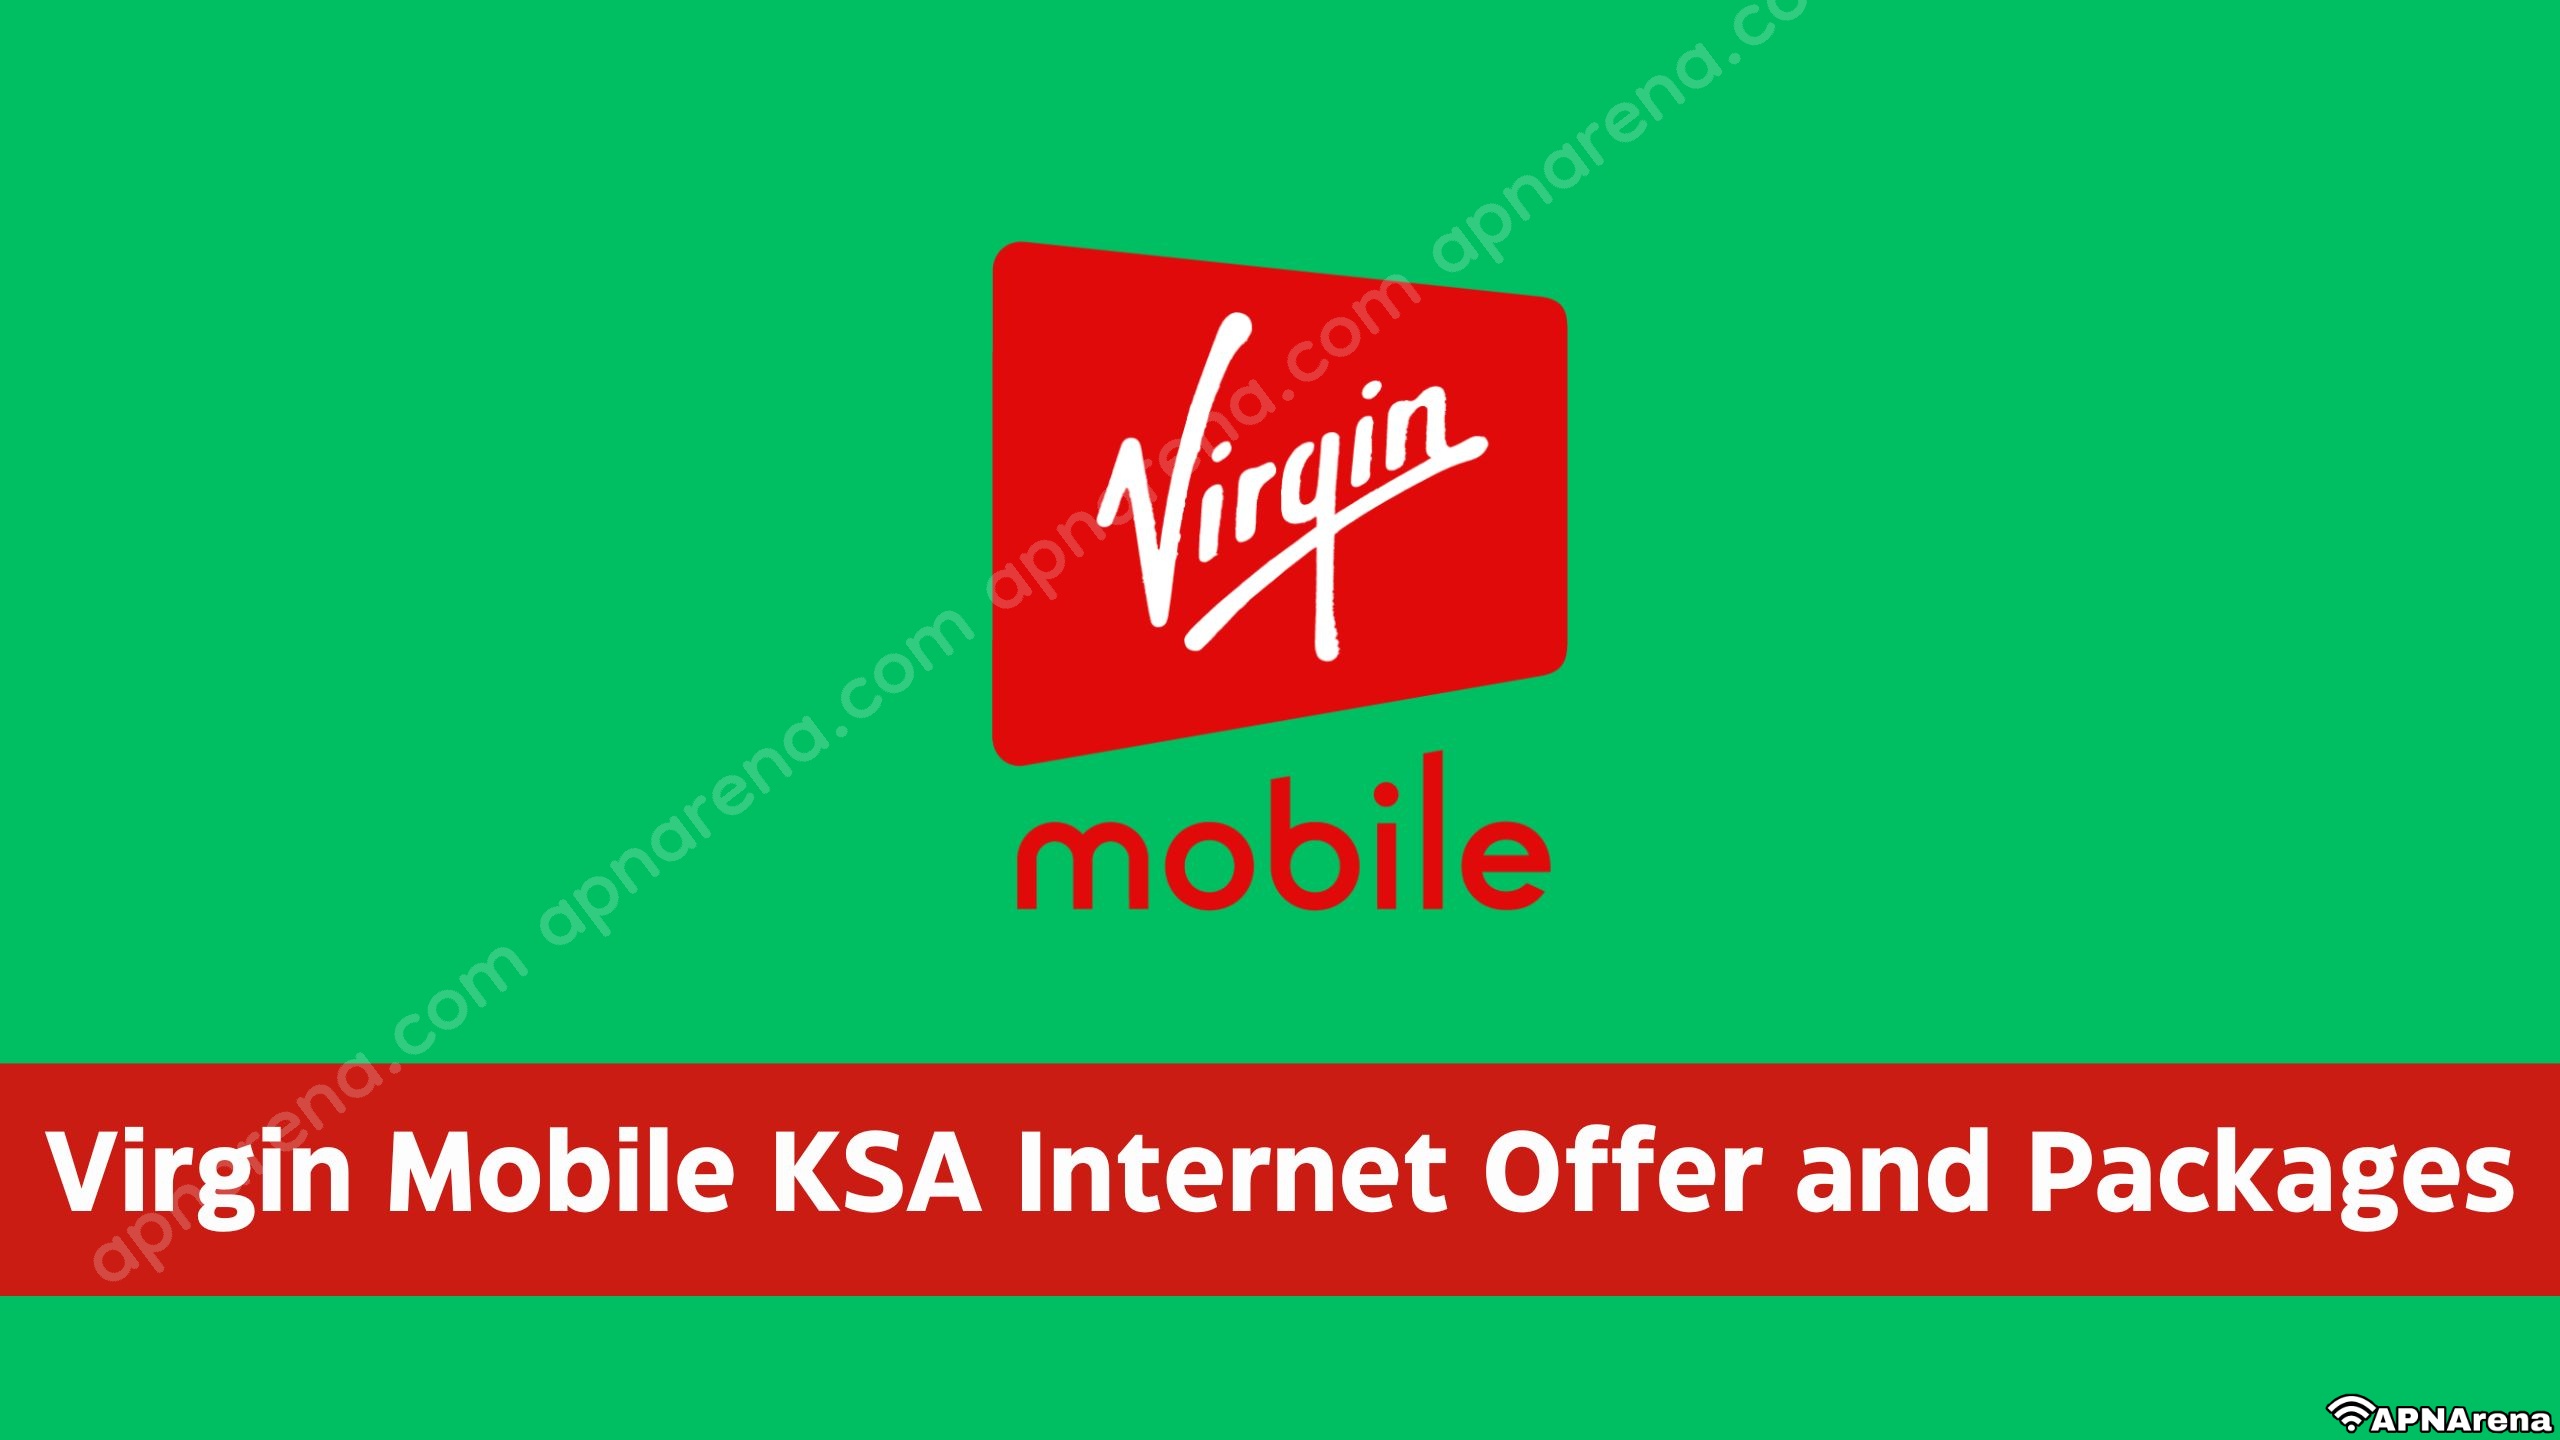 Virgin Mobile KSA Internet Offer and Packages | Call, Text, Data Plan, Roaming & Service Codes